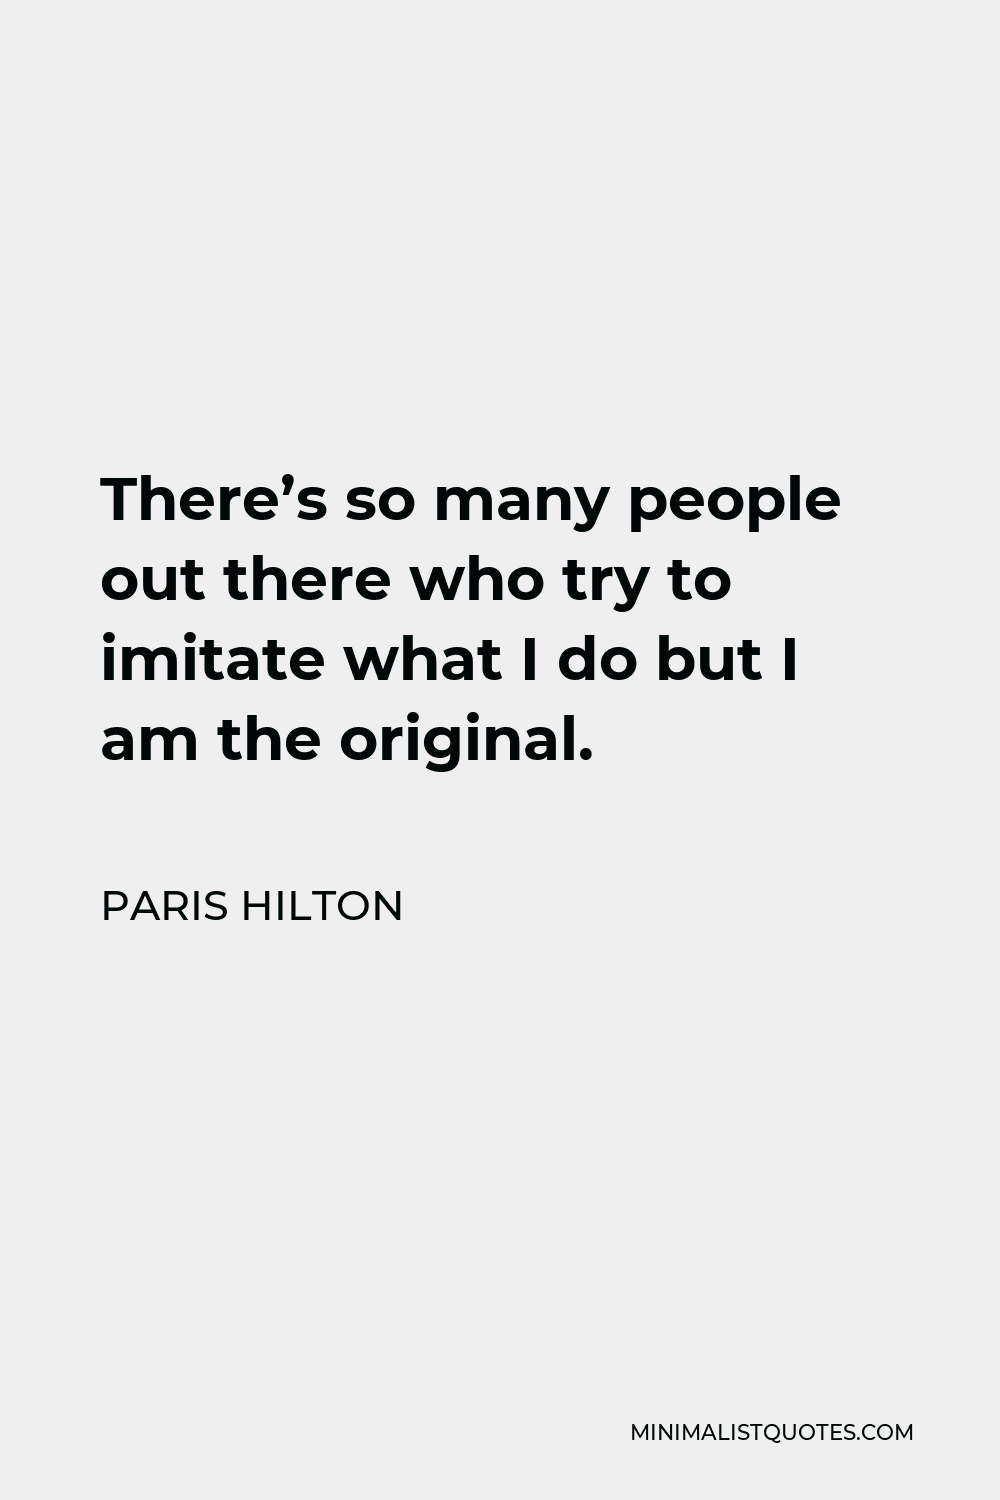 Paris Hilton Quote - There’s so many people out there who try to imitate what I do but I am the original.